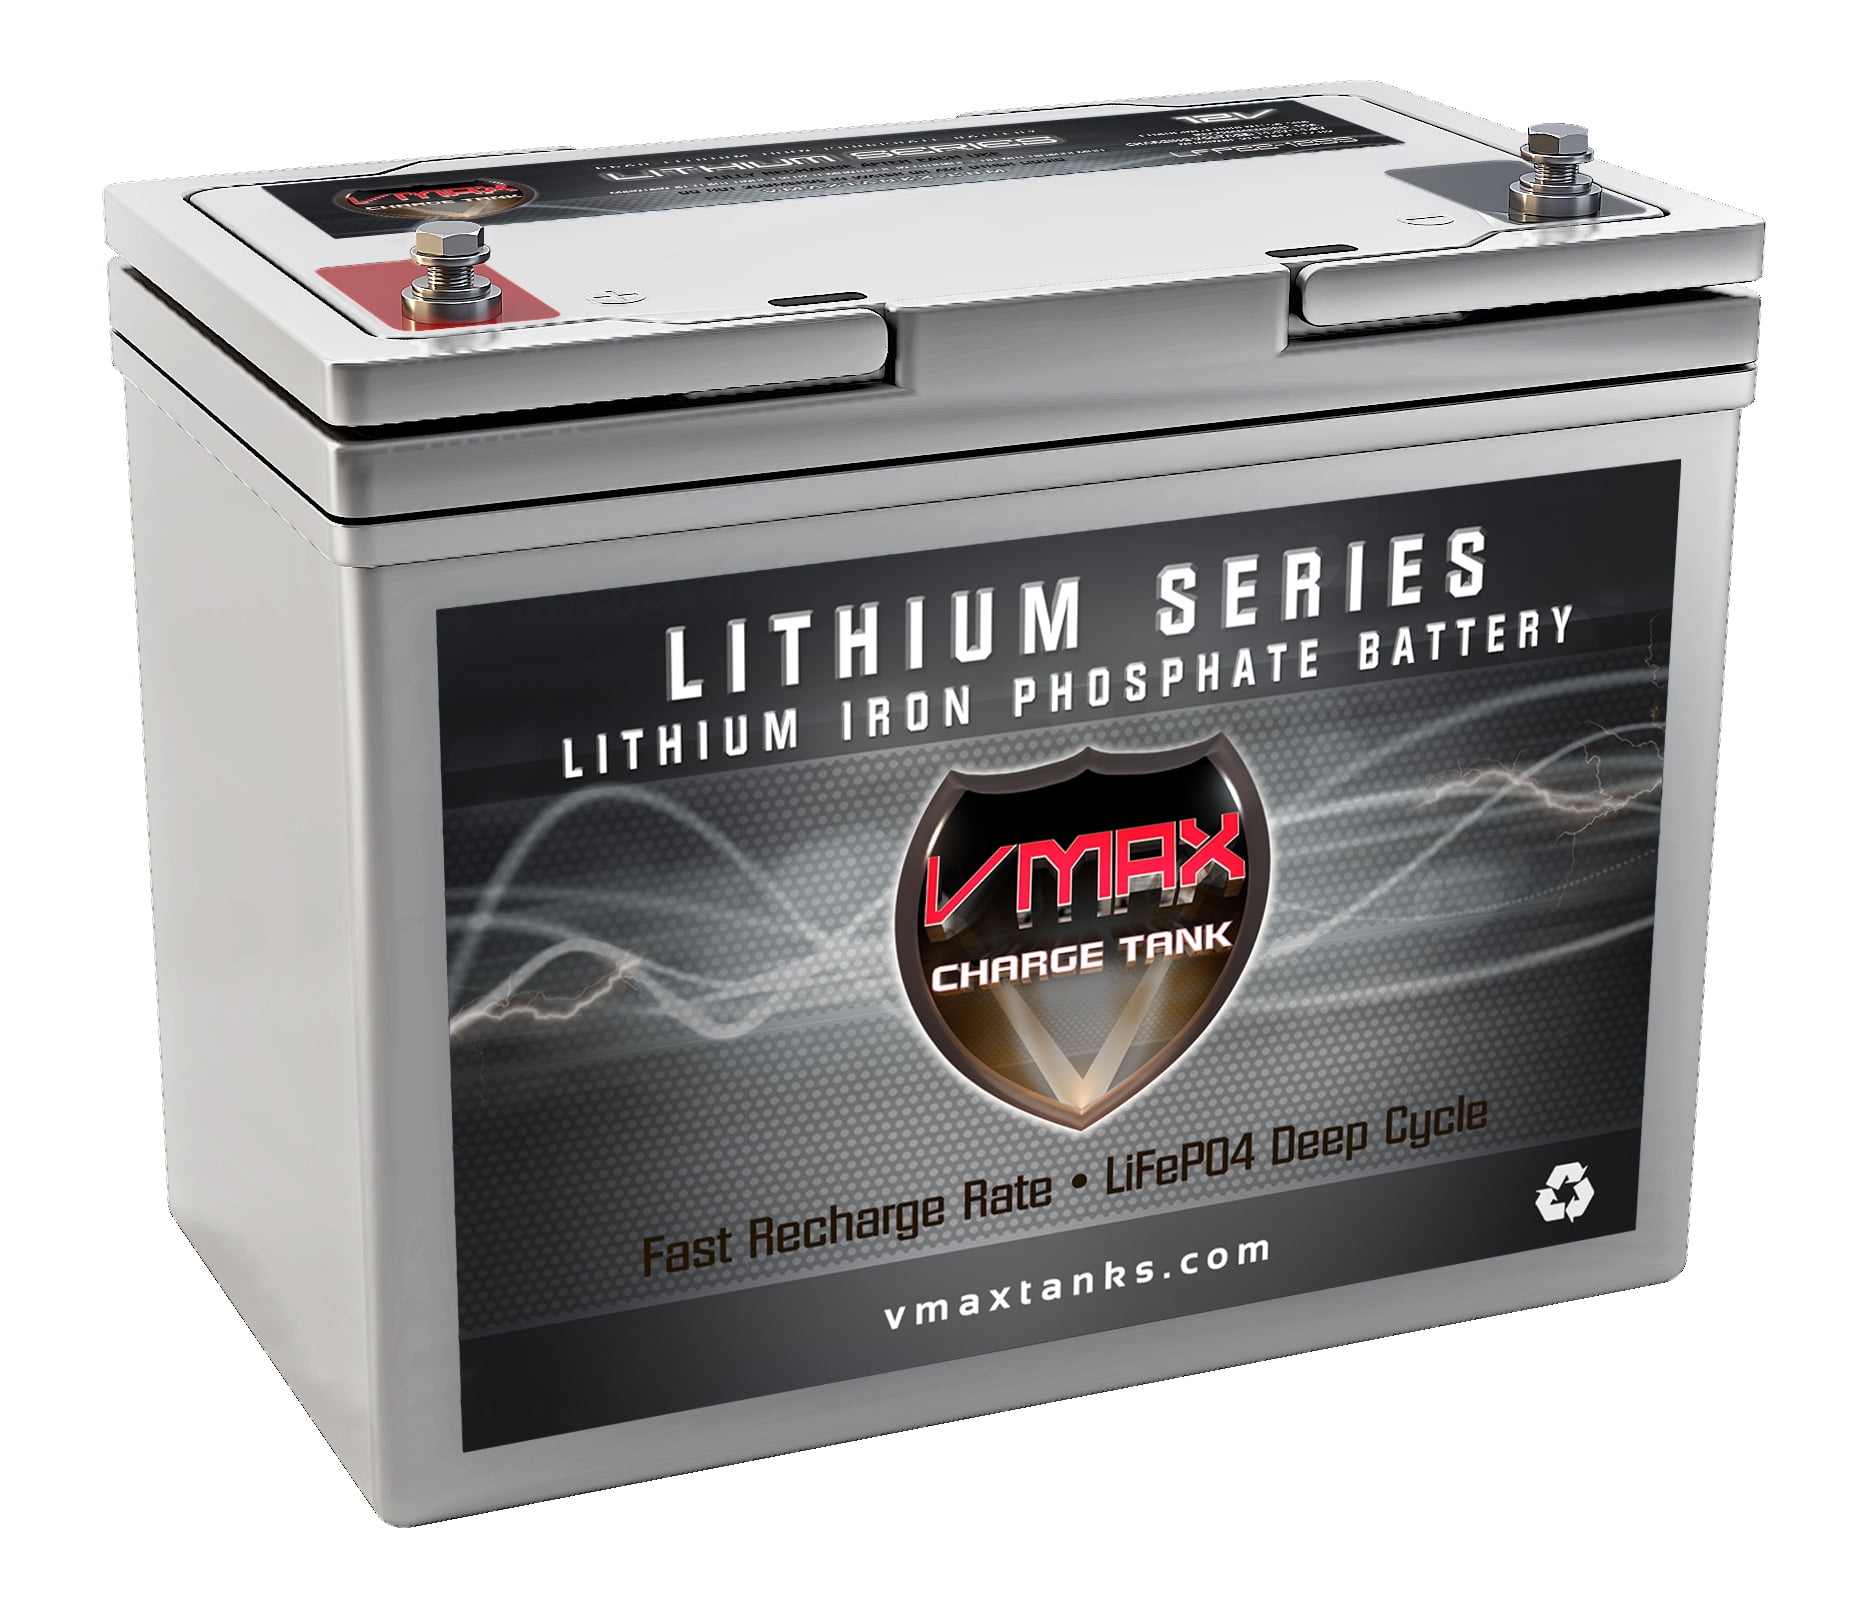 Handvest concept contrast VMAX LFP22-1255 Li-Iron LiFePO4 12V 55AH Lithium Battery 704Wh w/BMS Deep  Cycle Battery Replaces Sealed Lead Acid Batteries Group 22NF - Walmart.com